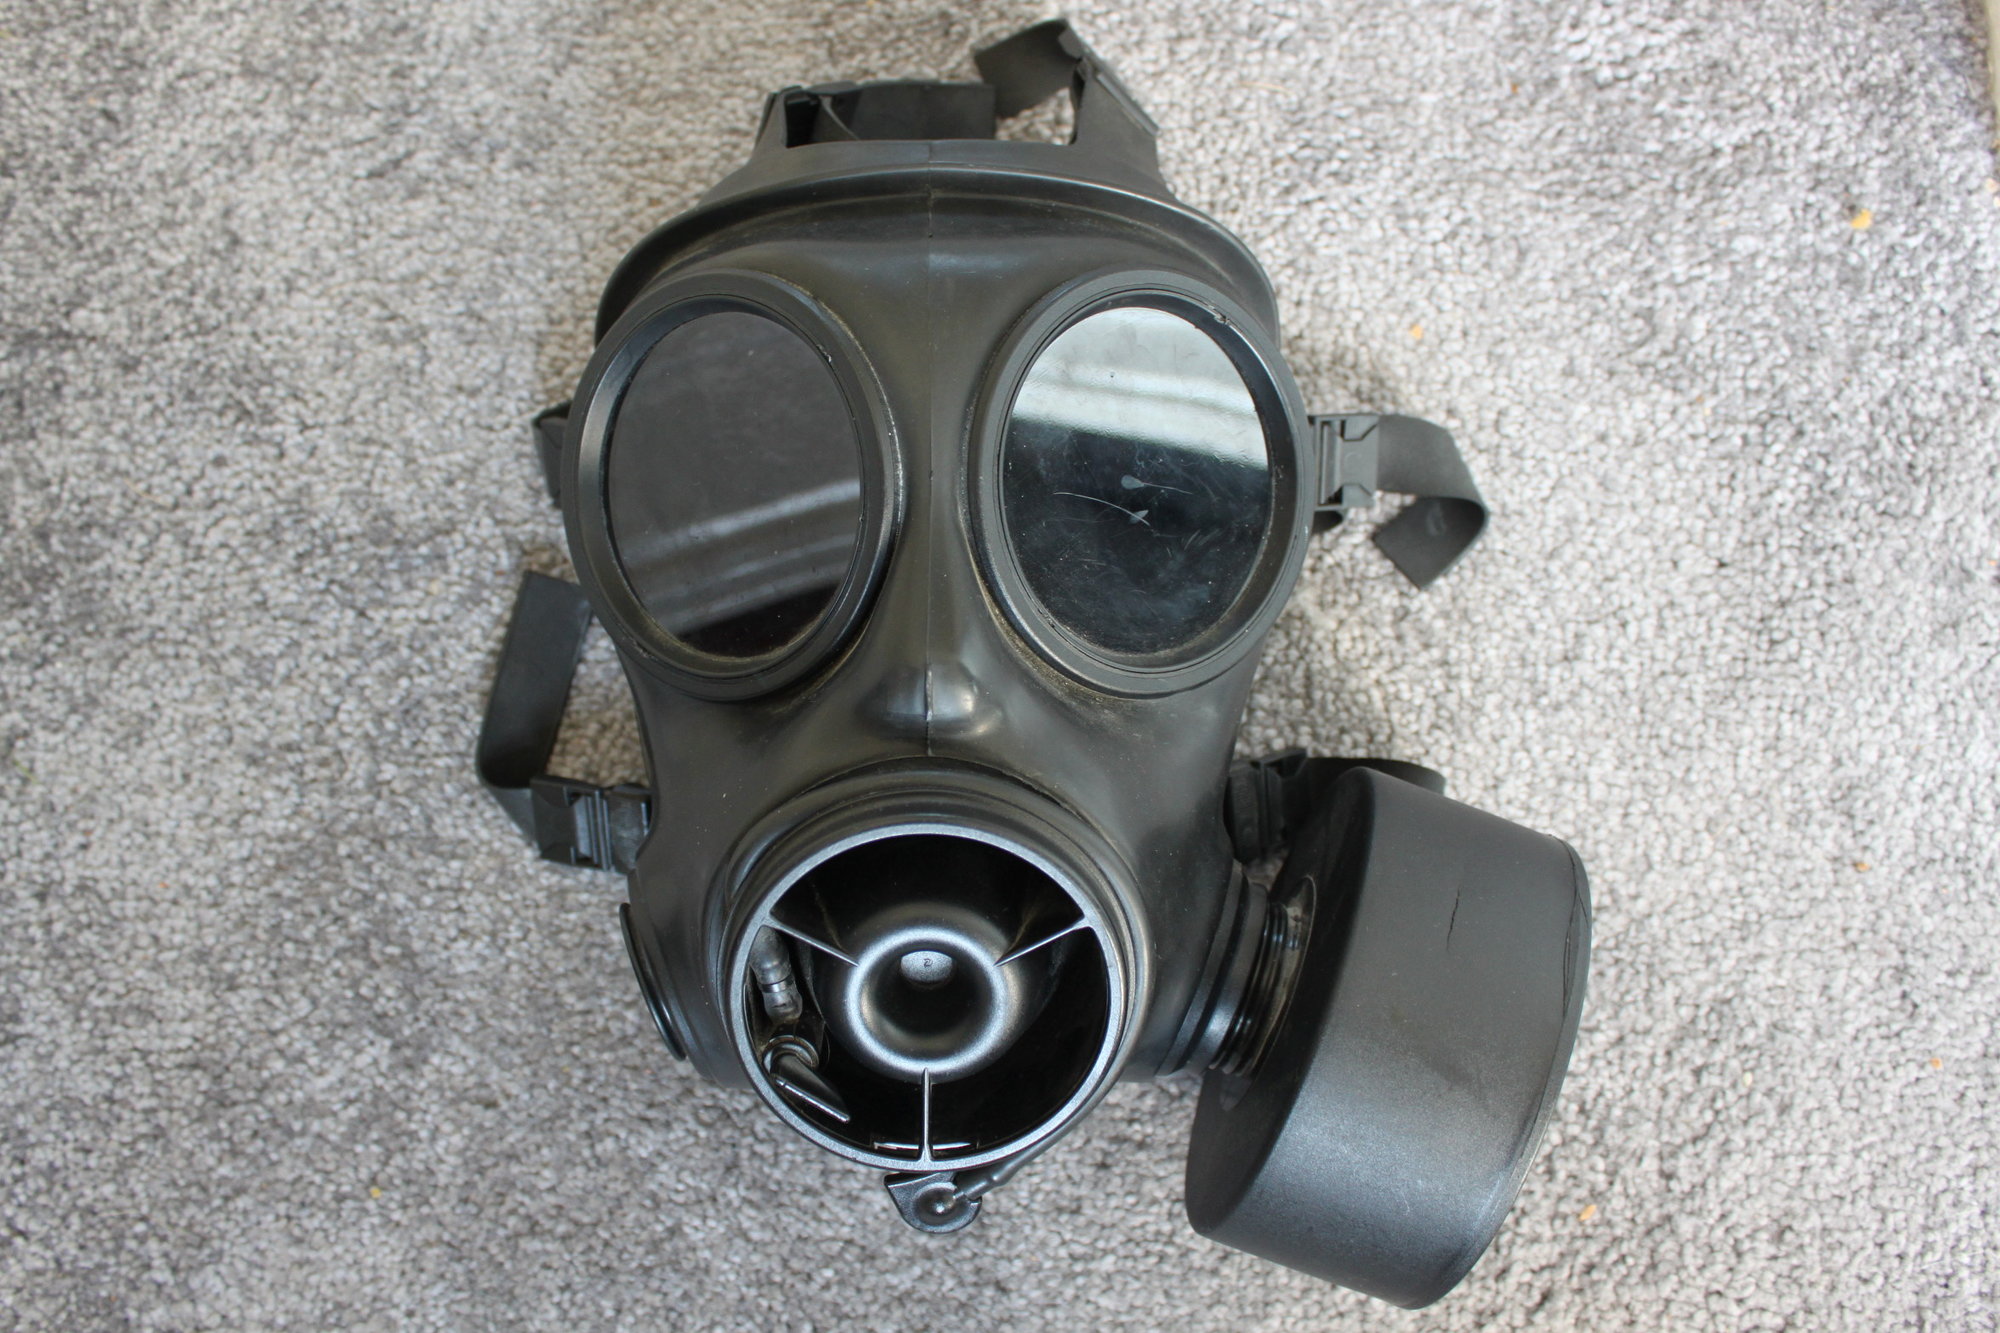 S10 Gas Mask Gear Airsoft Forums Uk